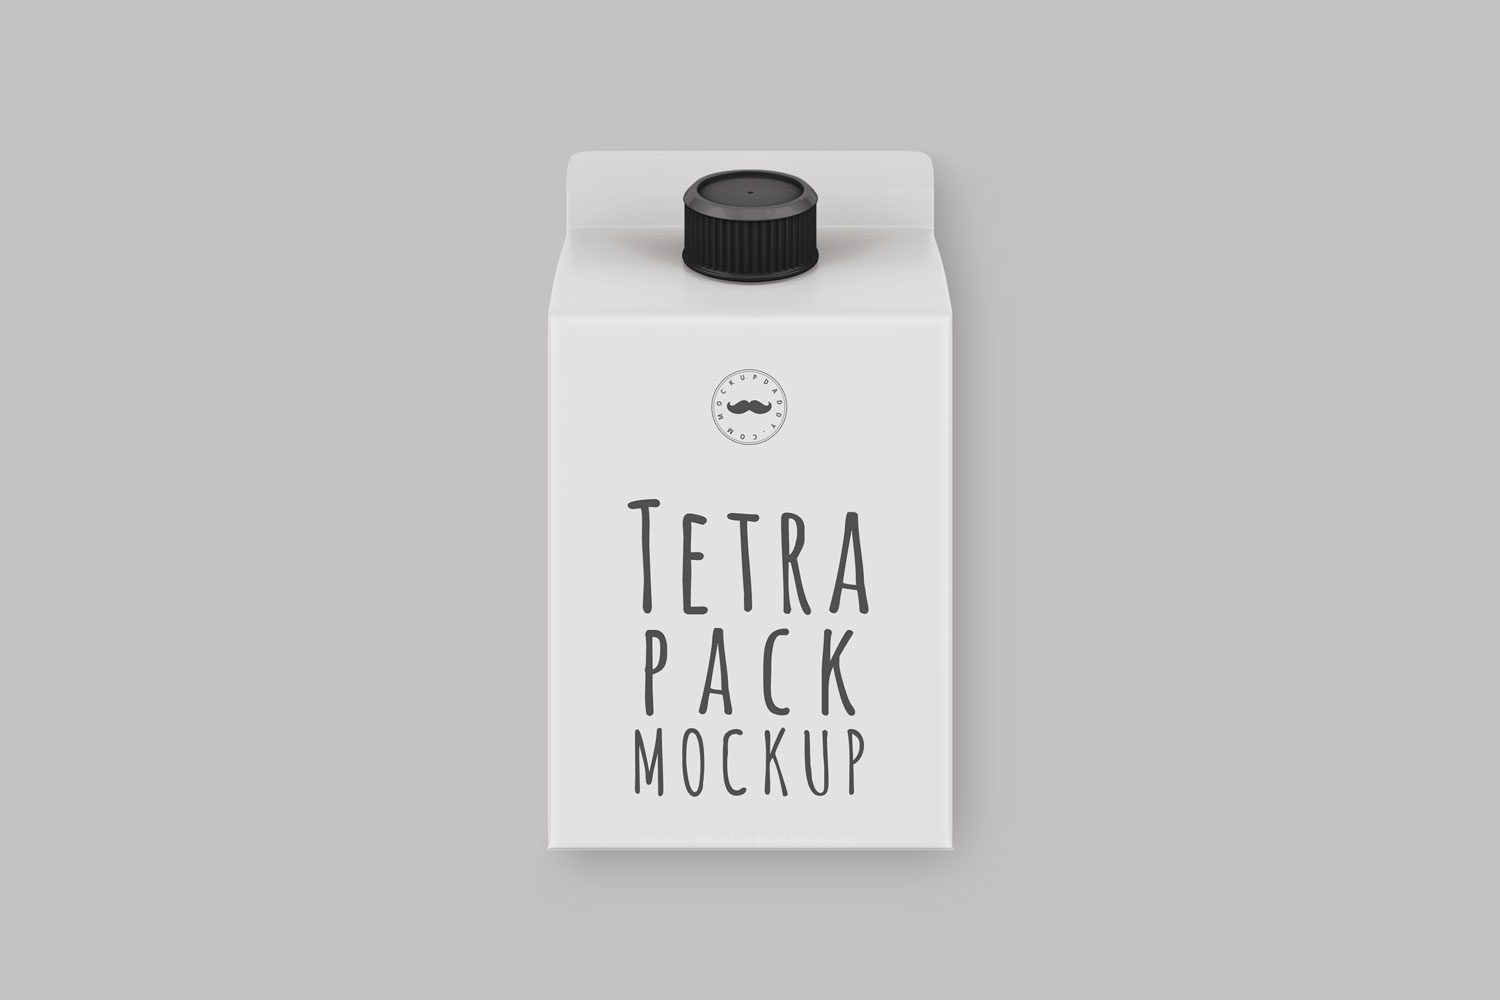 Small with Tetra Pack Mockup from the front side.